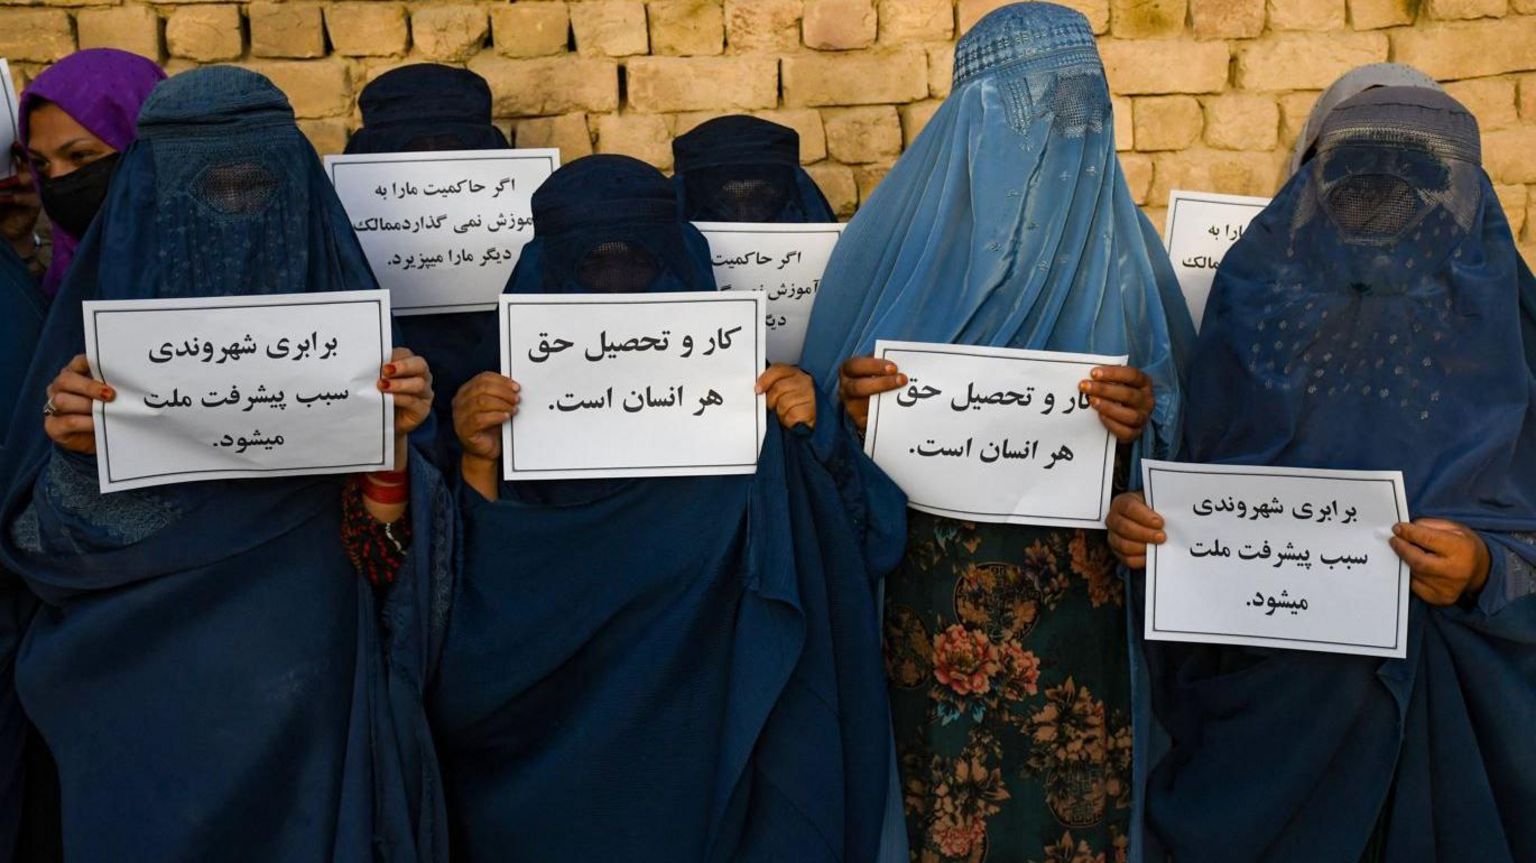 Afghan burqa-clad women hold placards as they protest for their right to education, in Mazar-i-Sharif on August 12, 2023. (